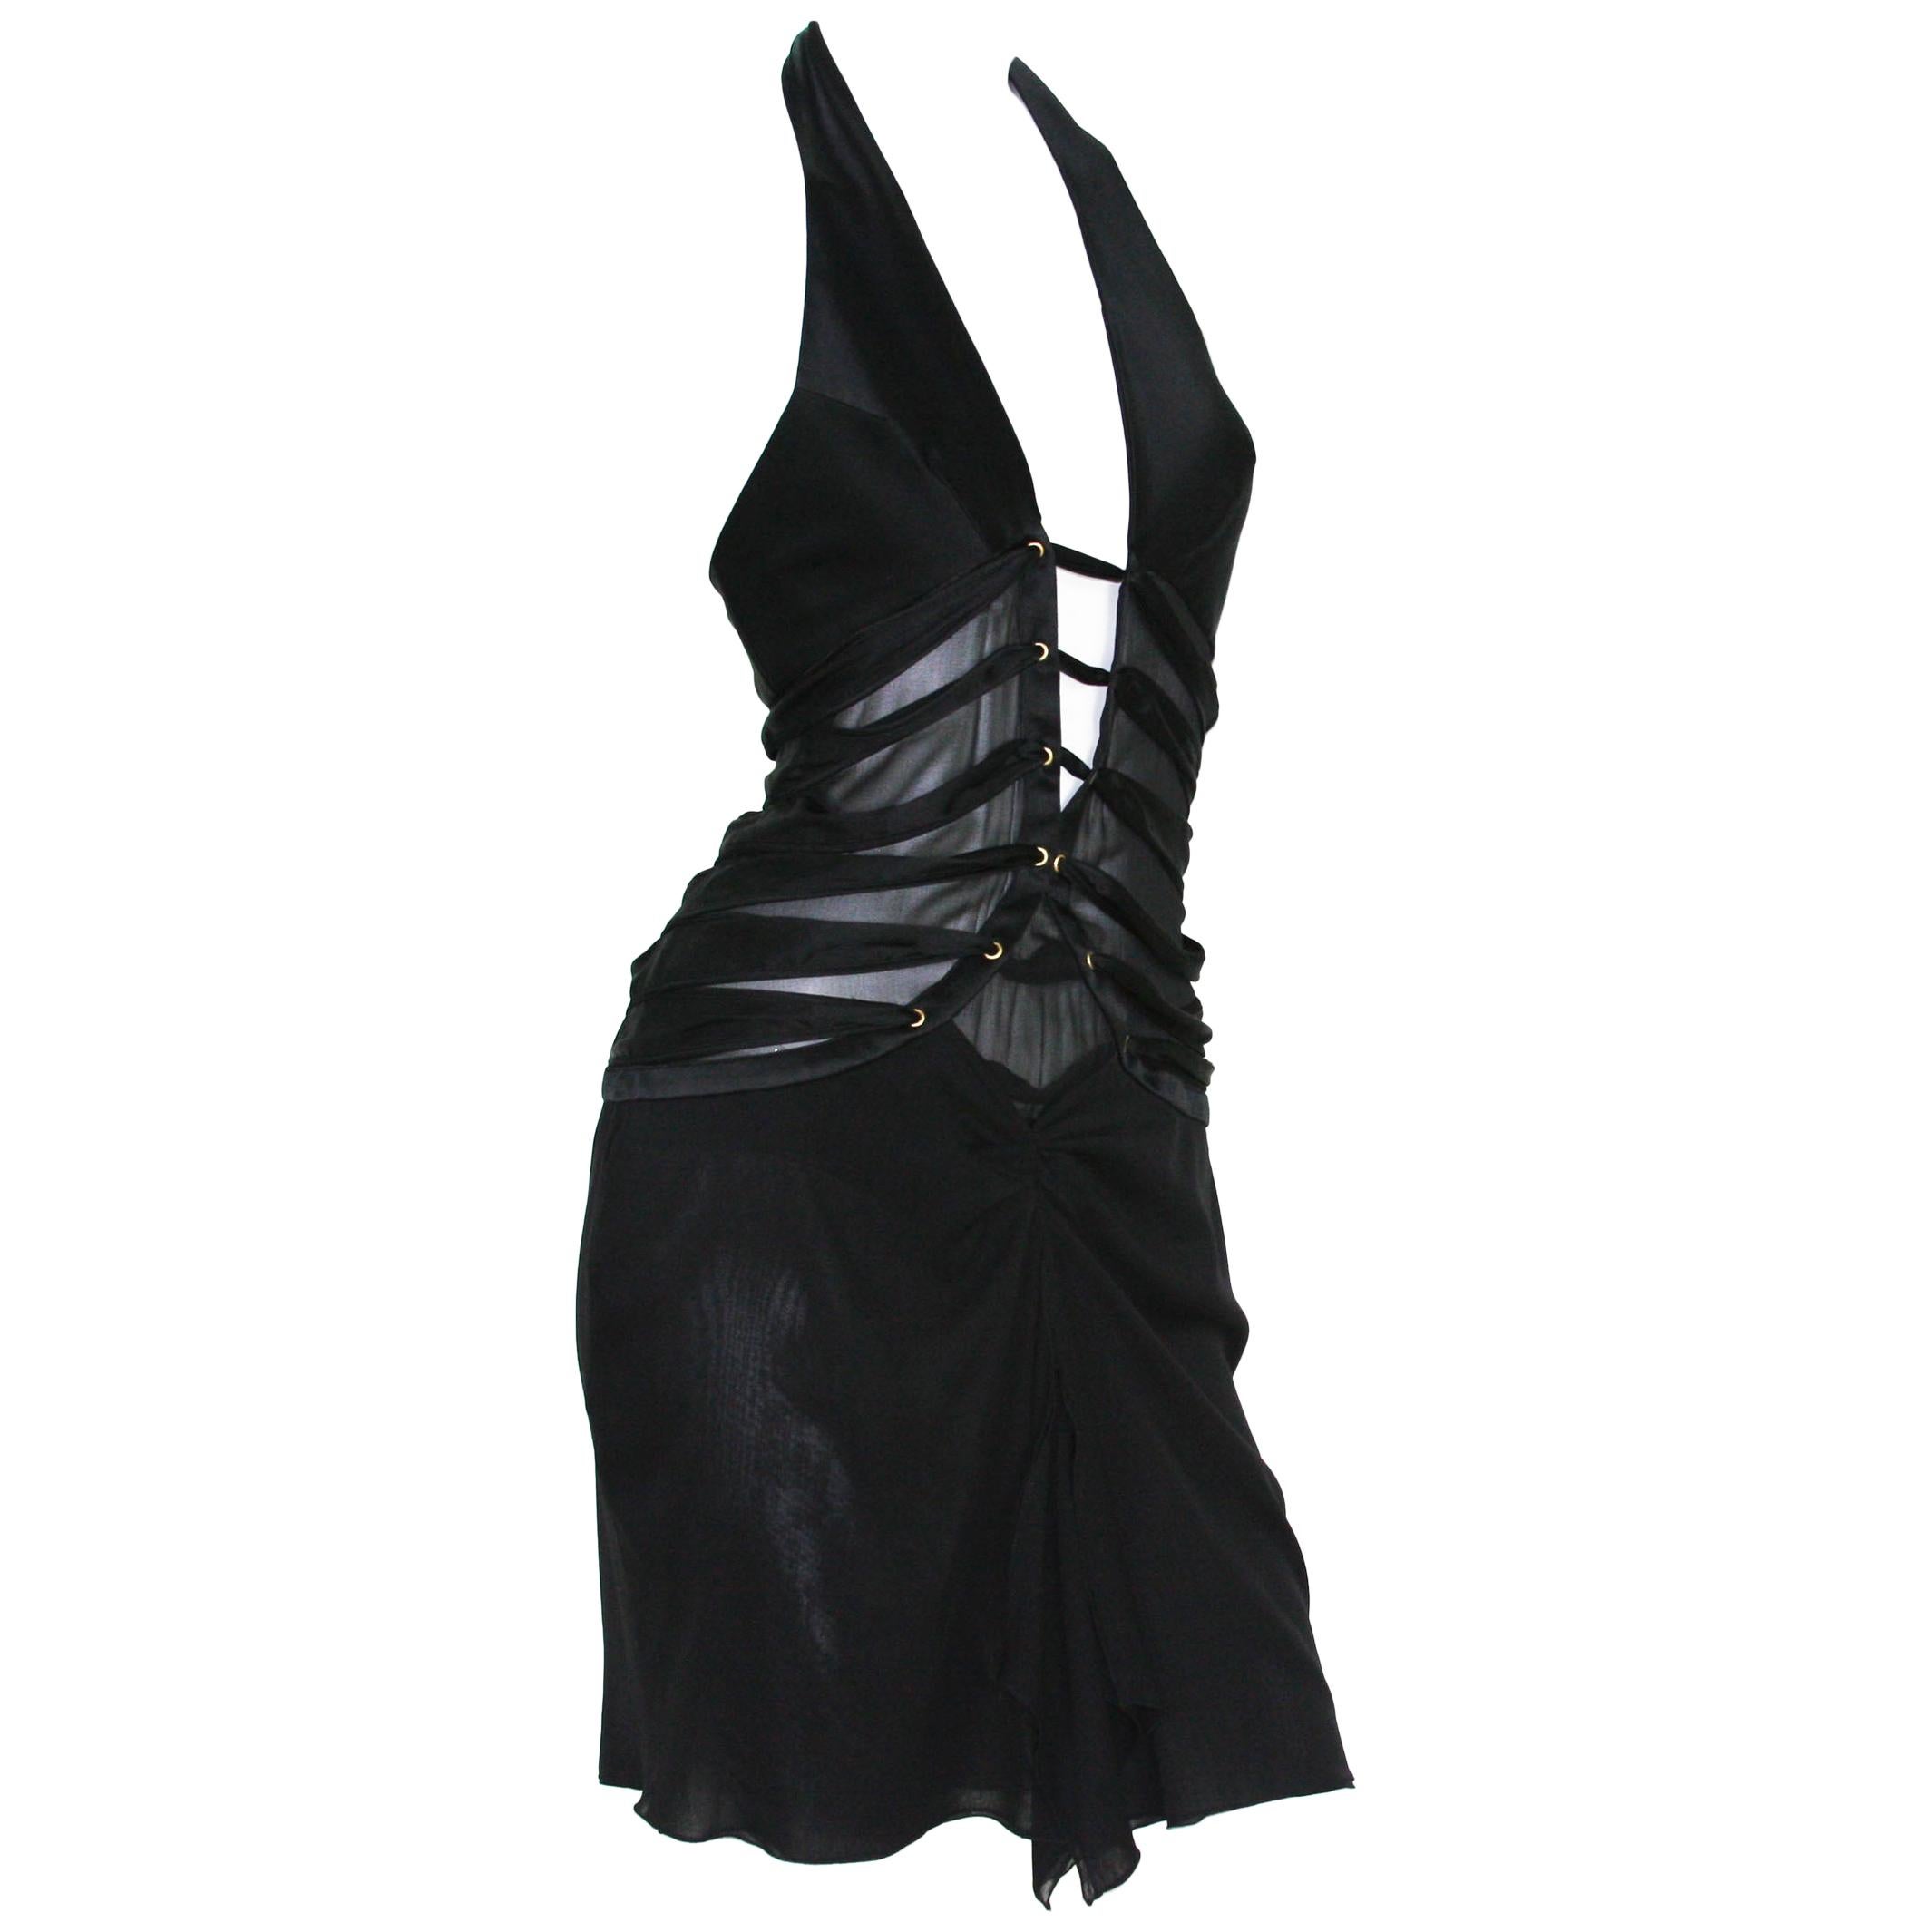 Tom Ford for Gucci SS 2003 Collection Deep Plunging Halter Mini Cut Out Dress 44